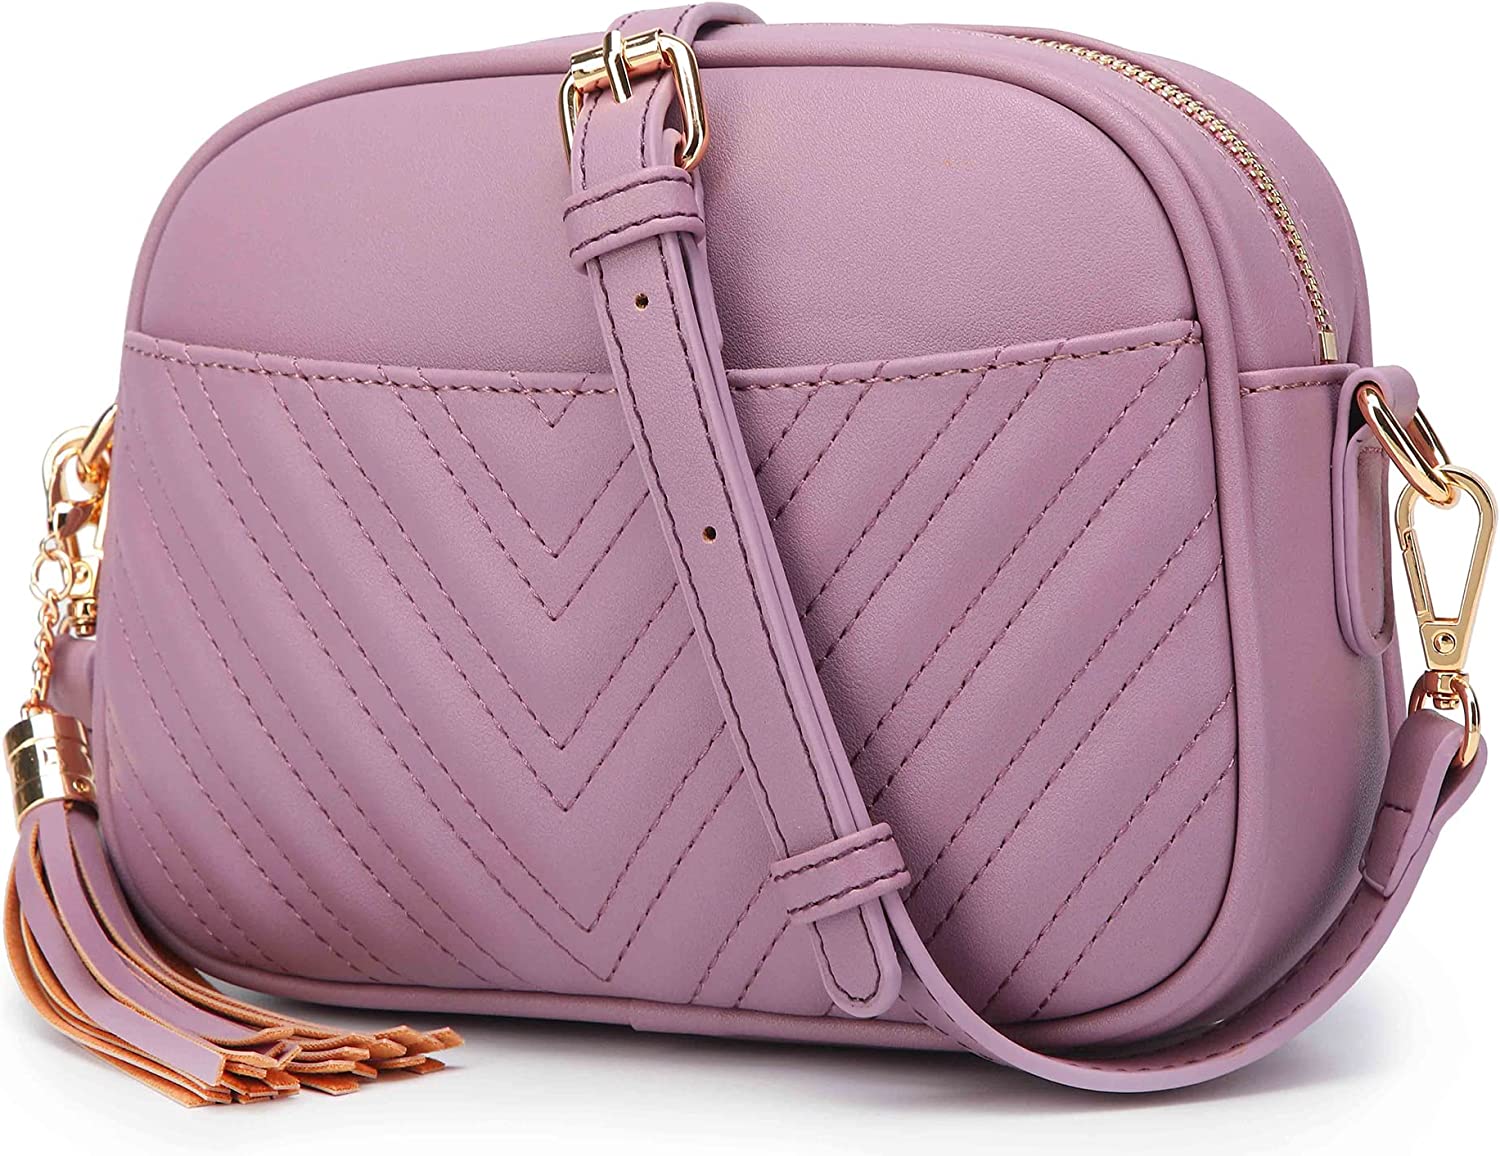 Quilted Design Luxury Small Size Shoulder Handbags - 9 Colors Lavender